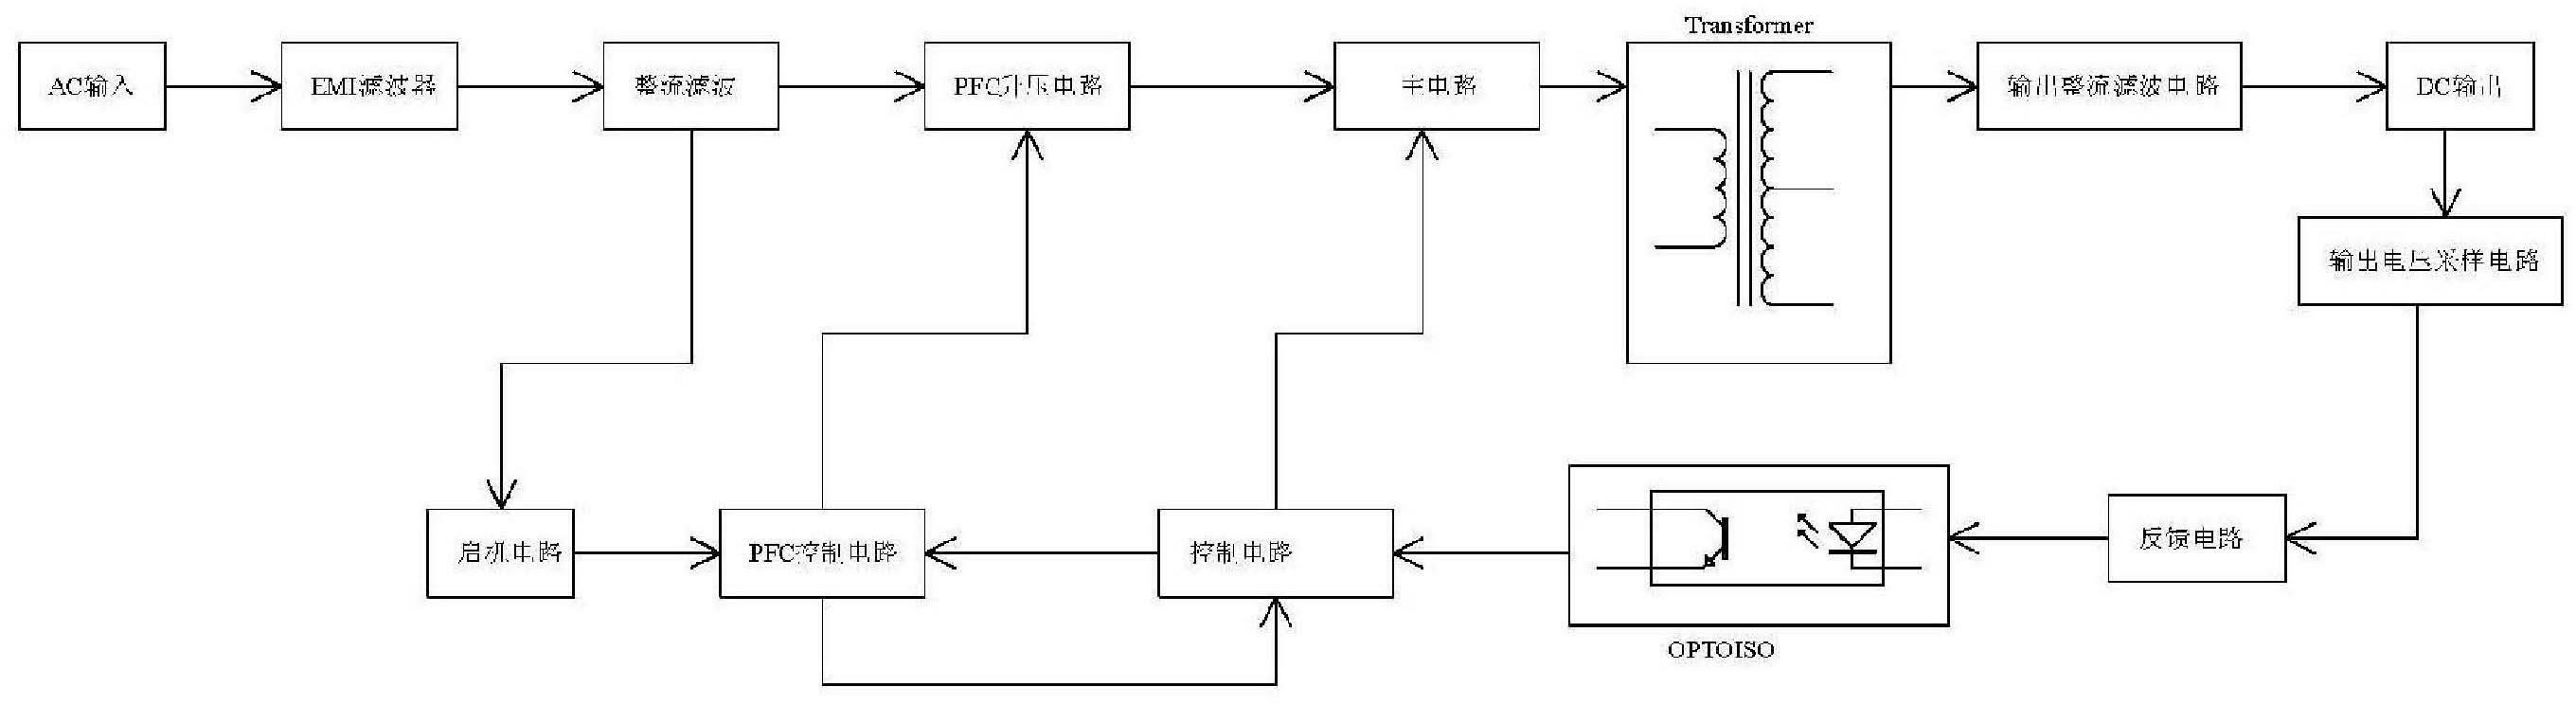 A half-bridge circuit with ultra-wide range constant current that realizes regulation from 0v